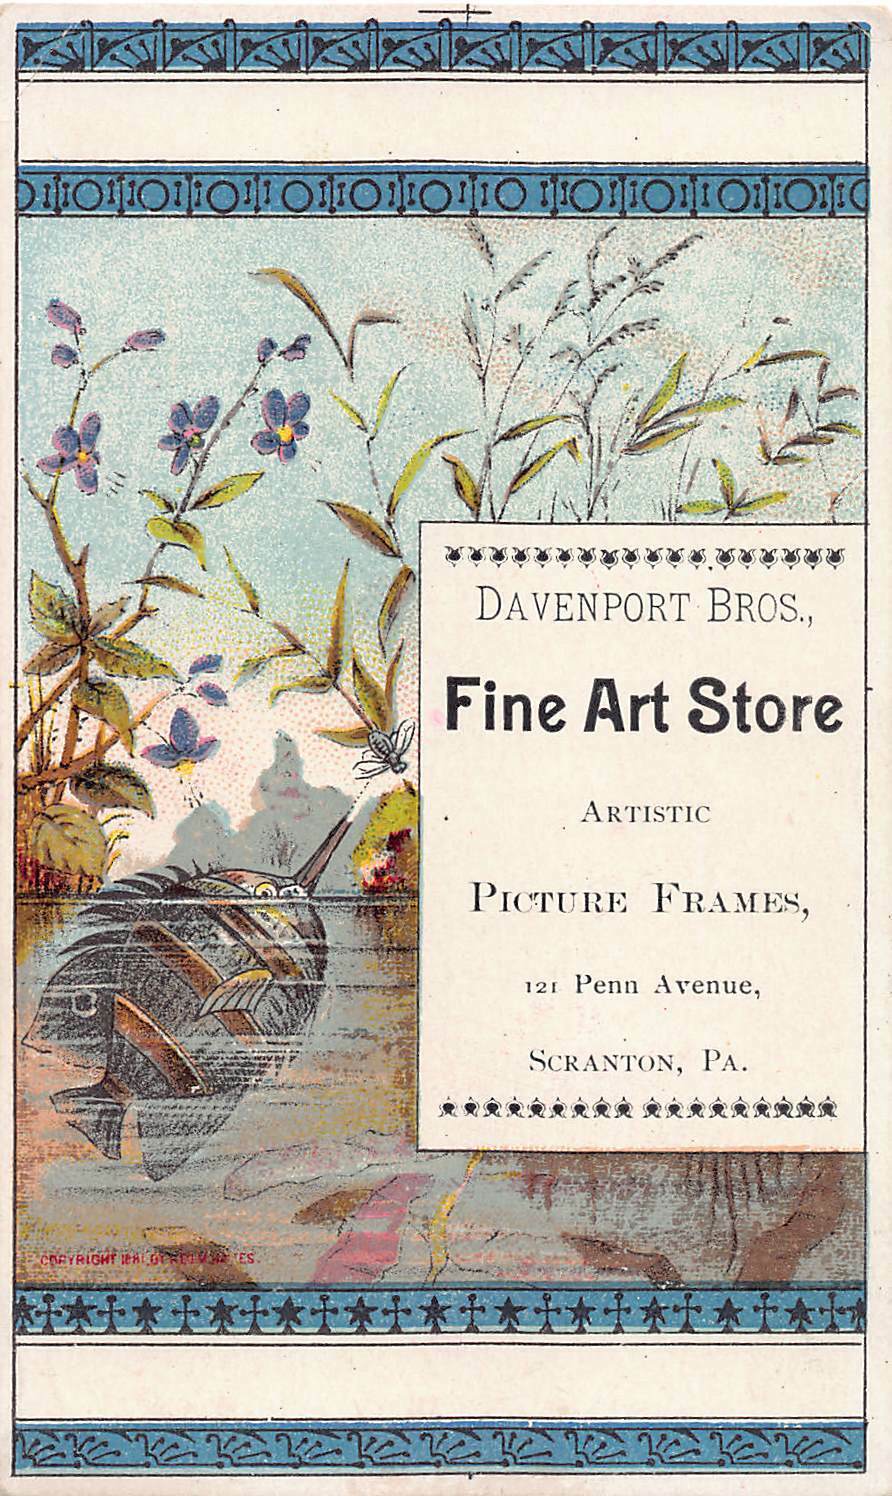 Davenport Bros. Fine Art Store, Early Trade Card, Size: 127 mm x 72 mm